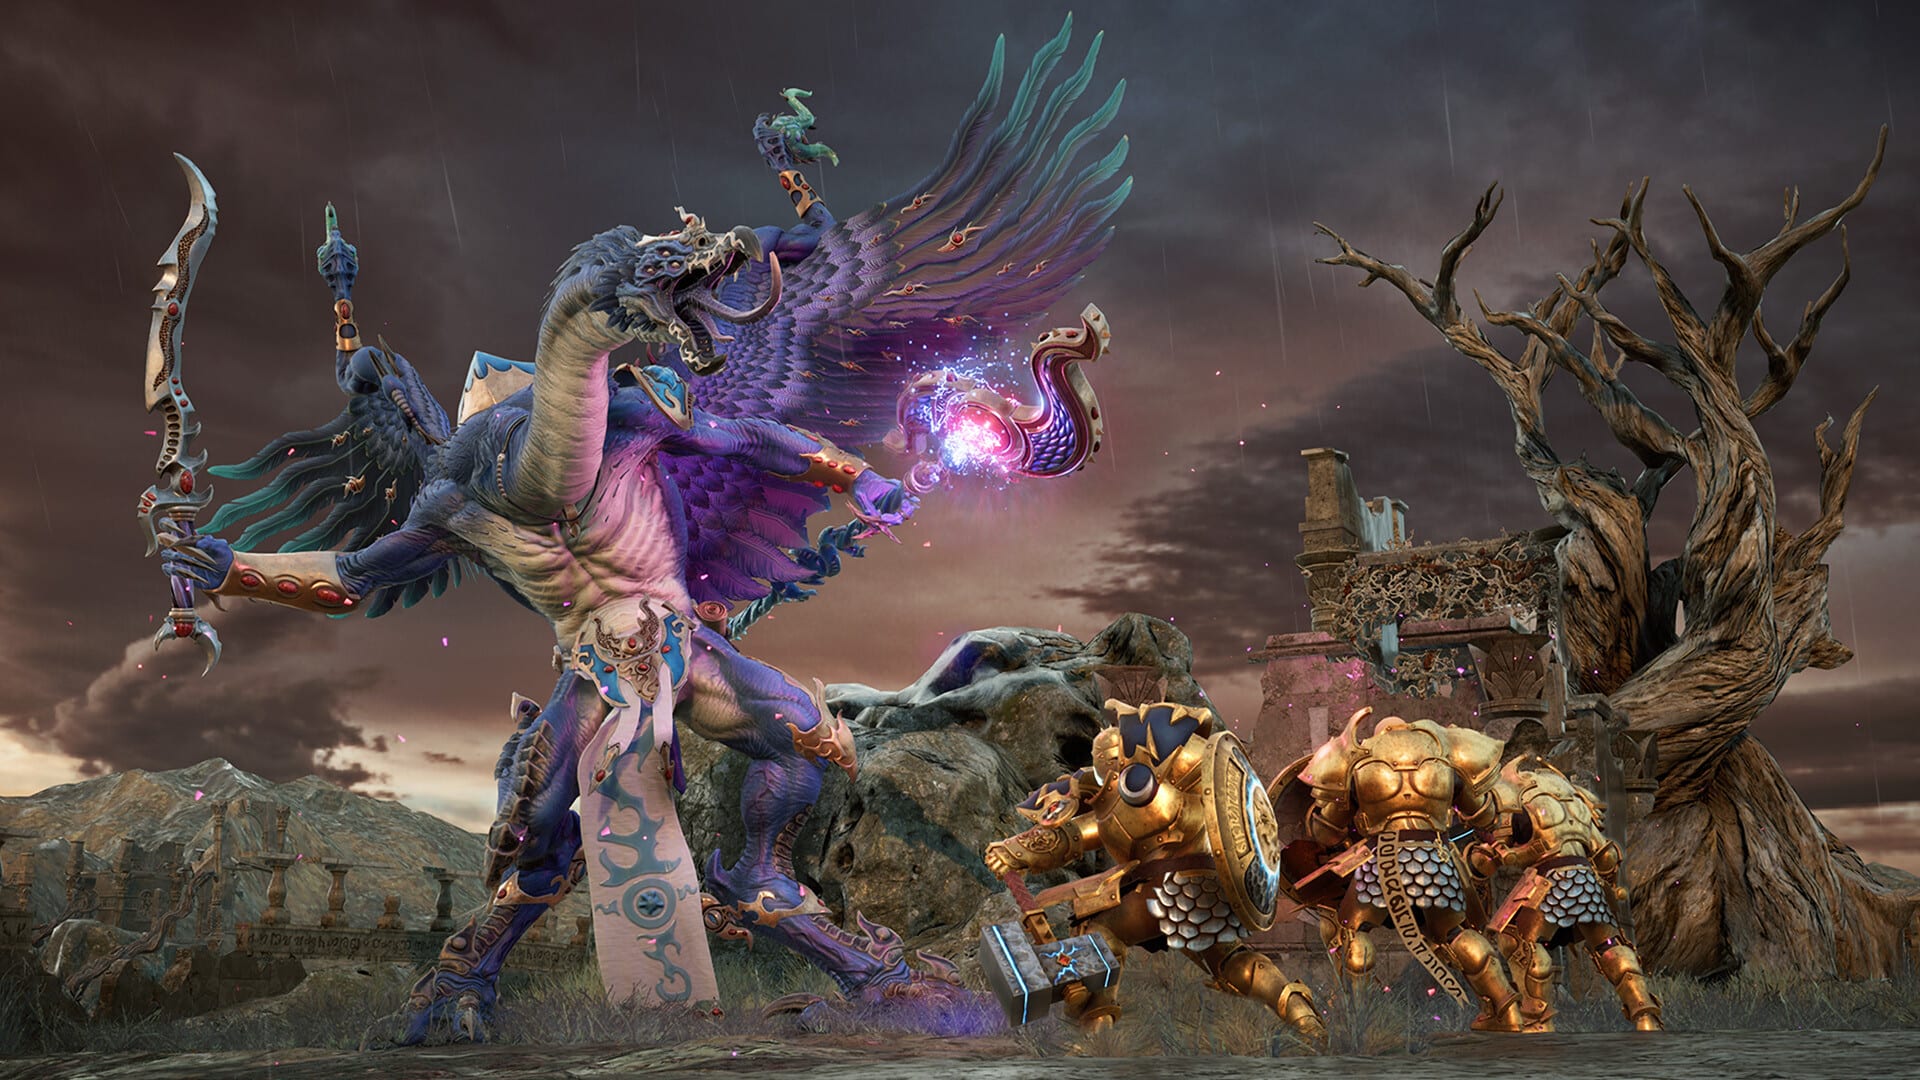 Screenshot from Warhammer: Age of Sigmar - Realms of Ruin showing a Daemon of Tzeentch fighting human soldiers.